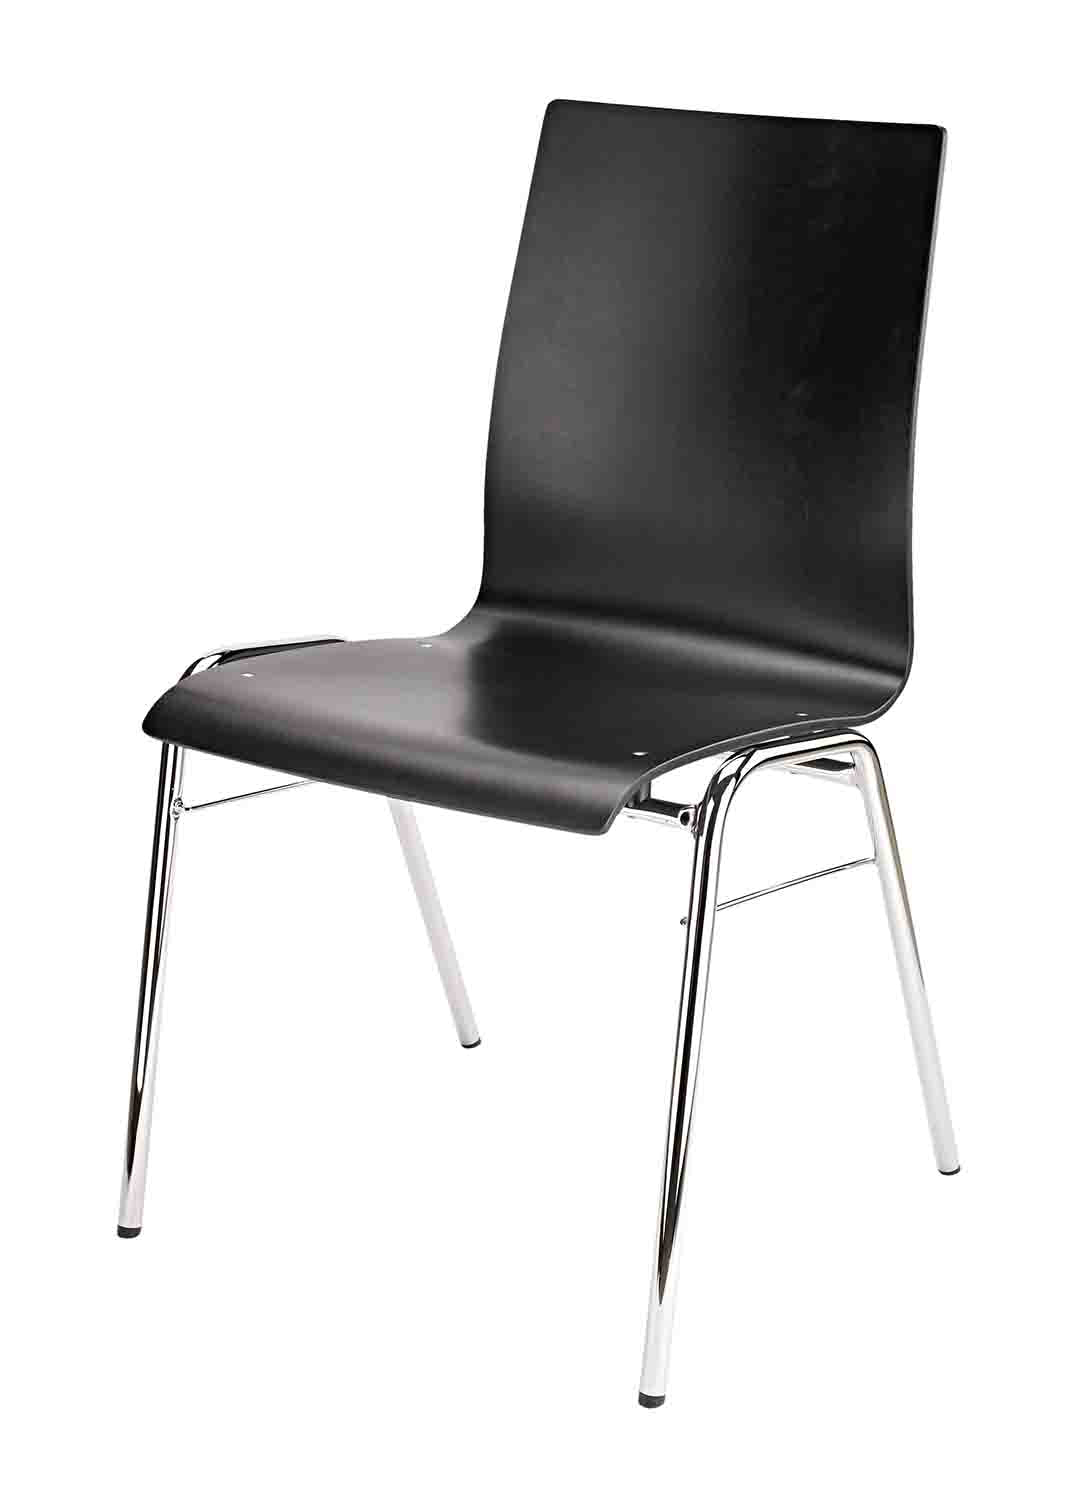 K&M 13405 Stacking Chair - Black with Chrome Legs - Hollywood DJ